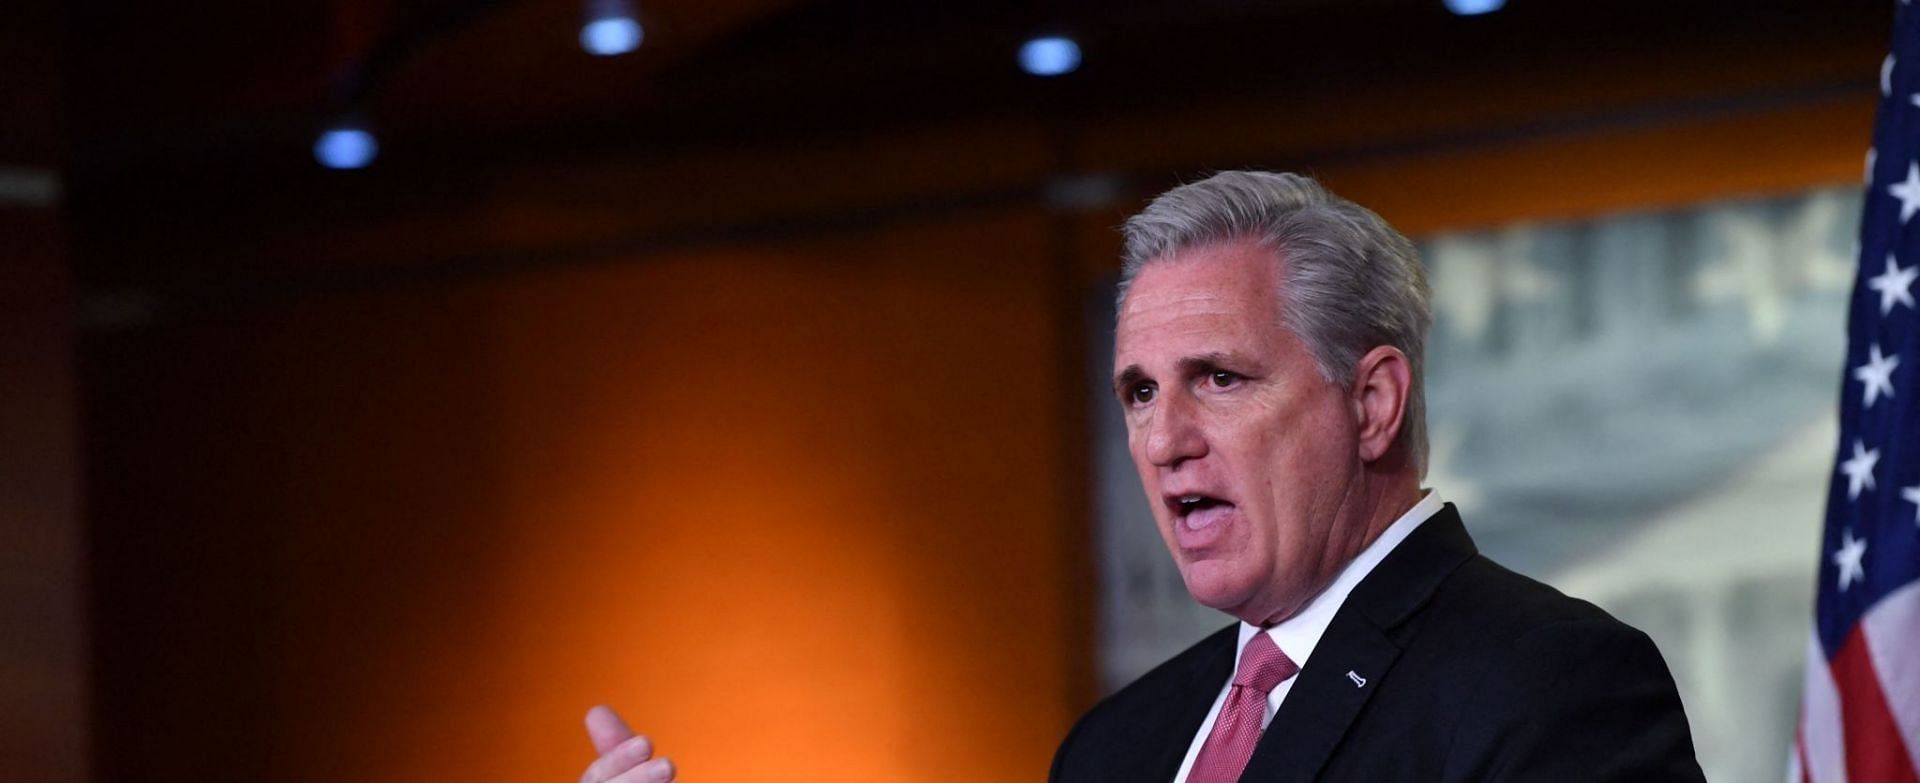 Kevin McCarthy has continued to struggle to receive support from GOP members for House speakership (Image via Getty Images)